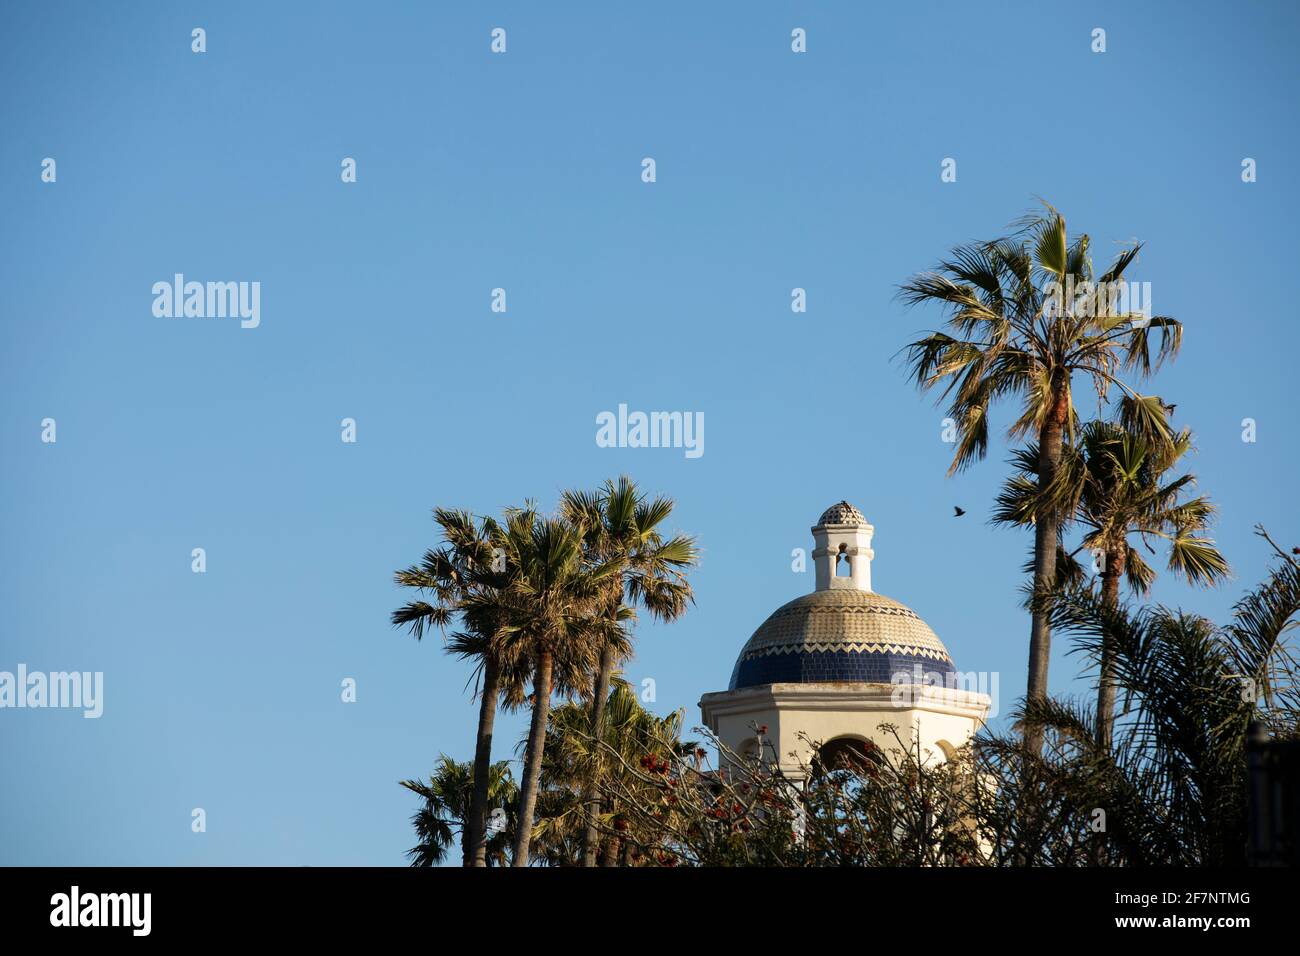 Birds fly by palm trees and historic architecture in Oxnard, California, USA. Stock Photo